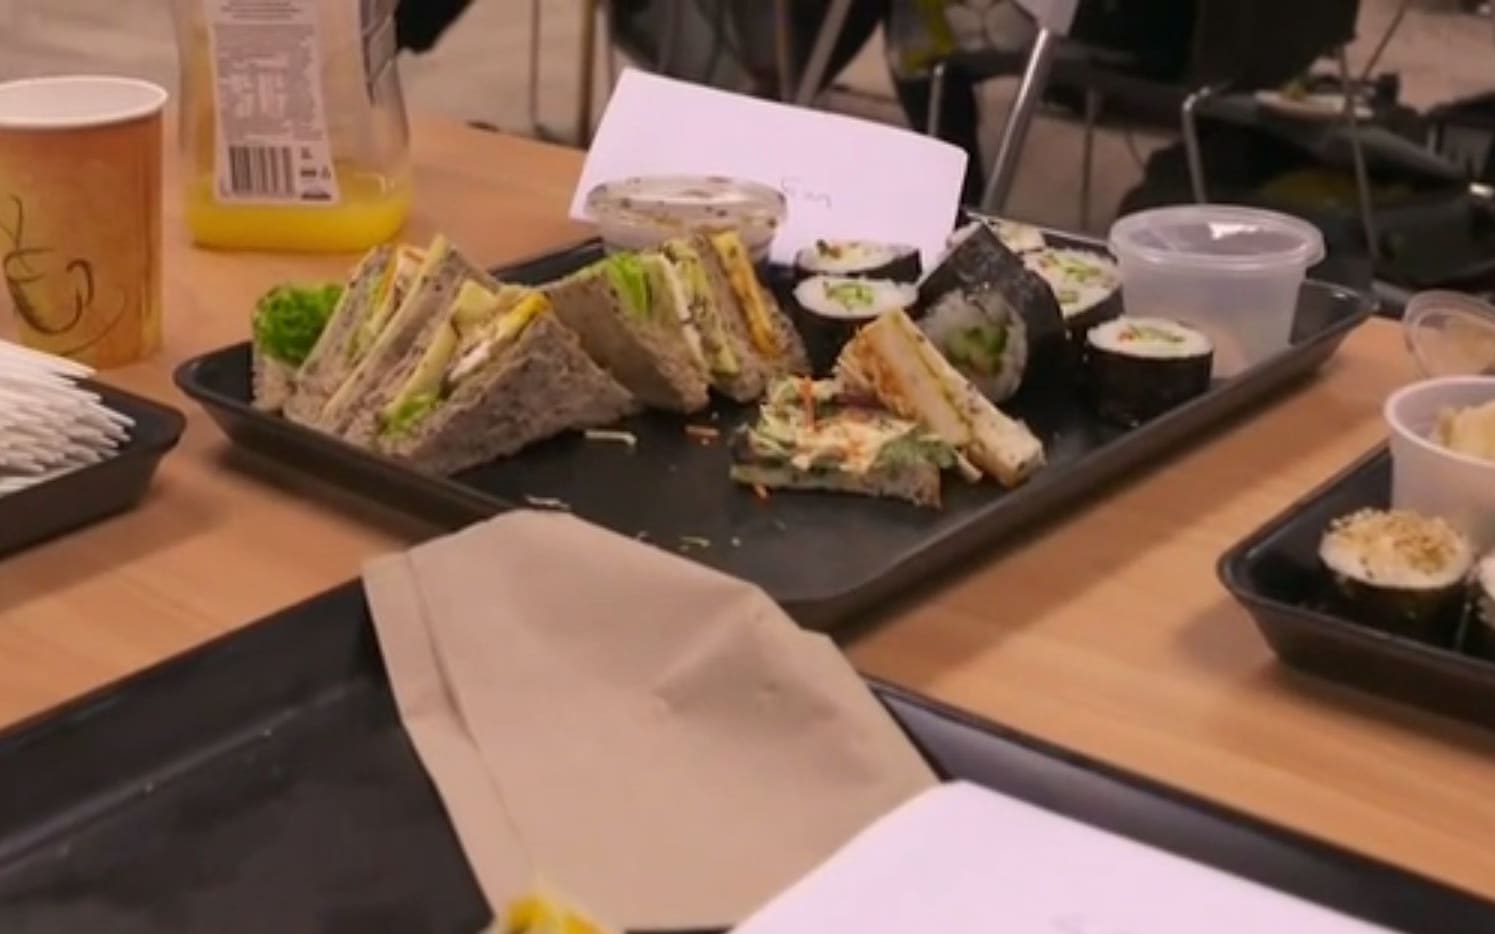 A NZHerald.co.nz livestream of reporters' sandwiches and juice at Auckland Hospital.